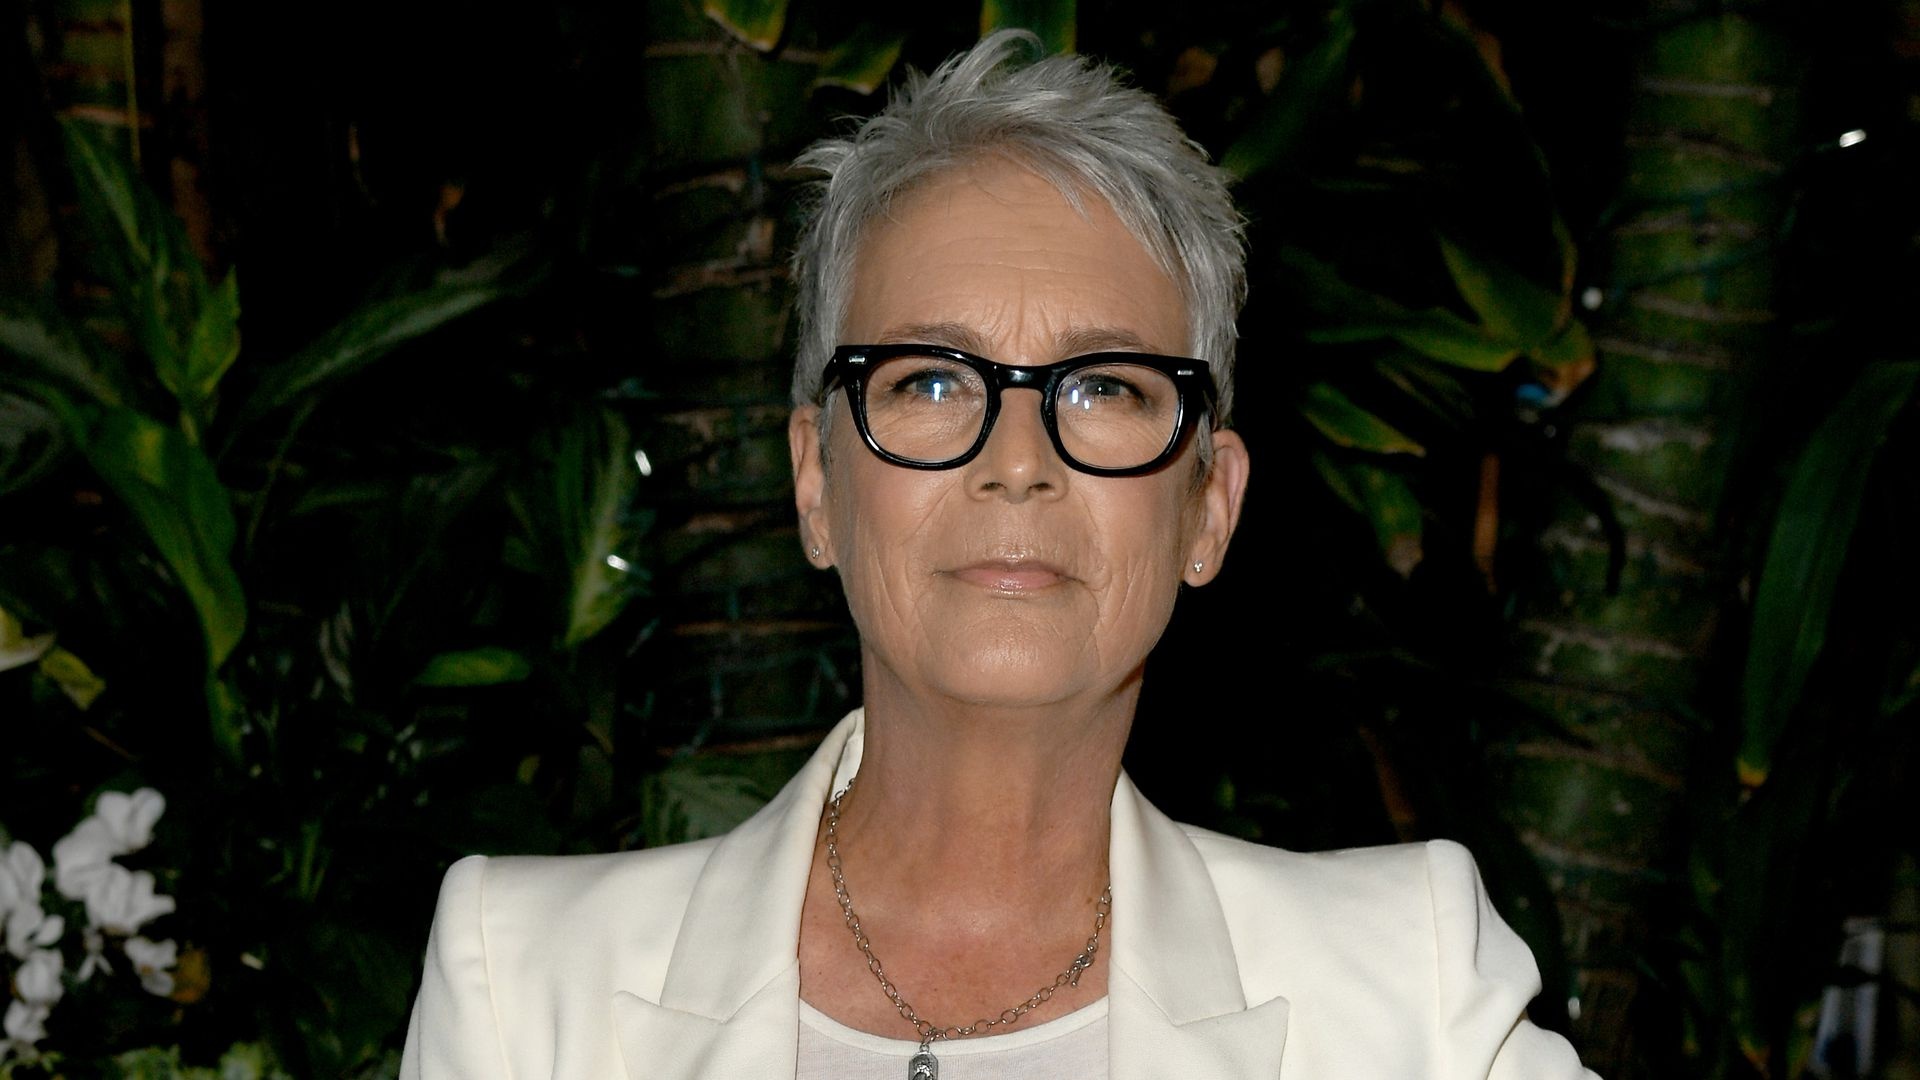 Jamie Lee Curtis, Love story, Cancer survivor, Unexpected marriage, 1920x1080 Full HD Desktop